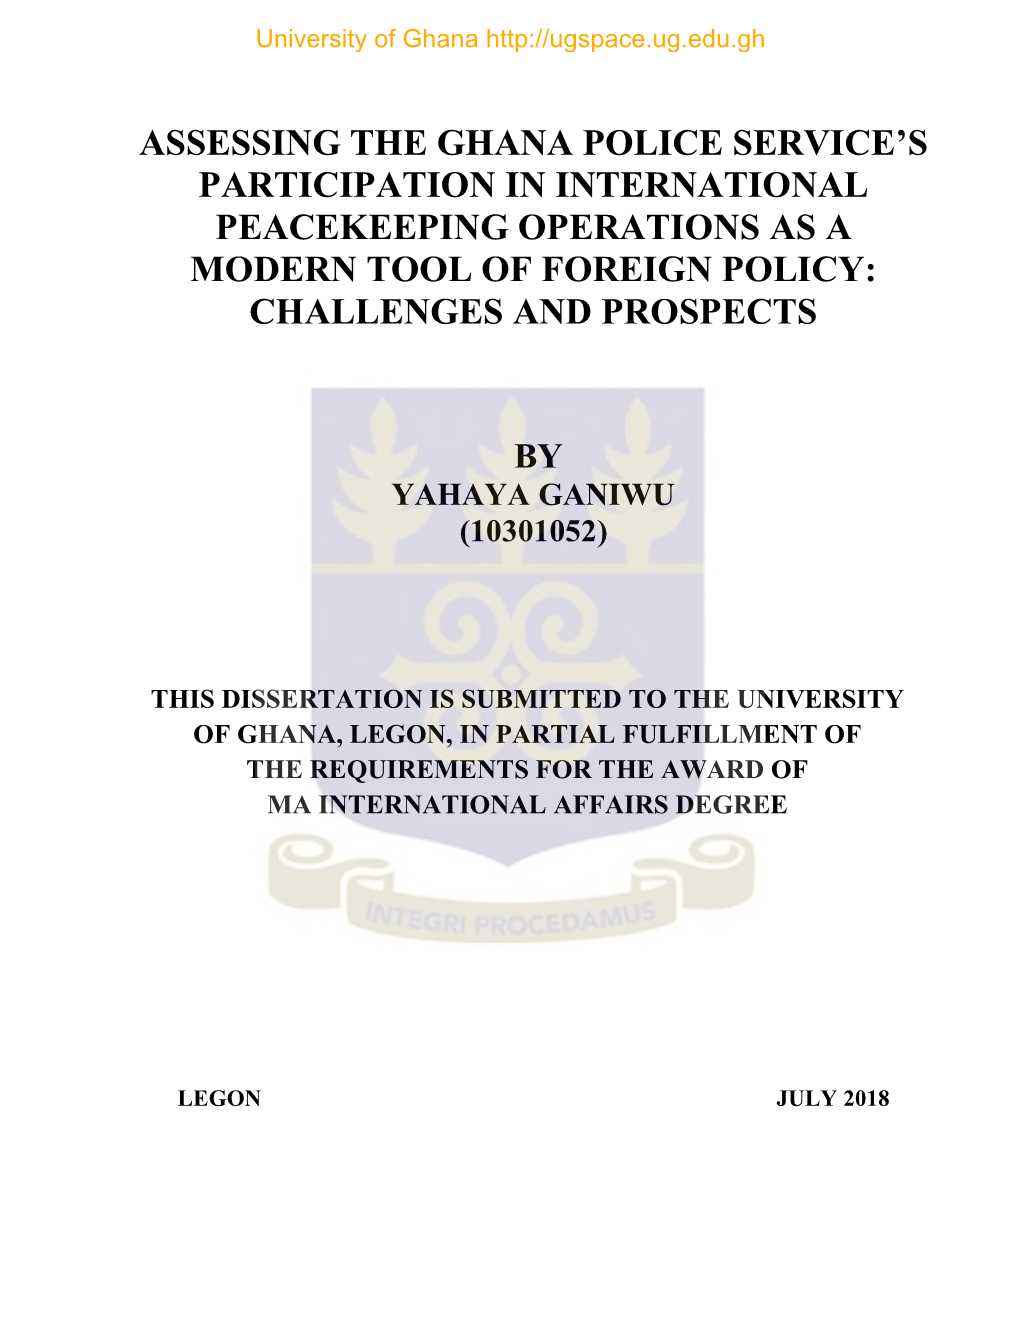 Assessing the Ghana Police Service's Participation in International Peacekeeping Operations As a Modern Tool of Foreign Policy